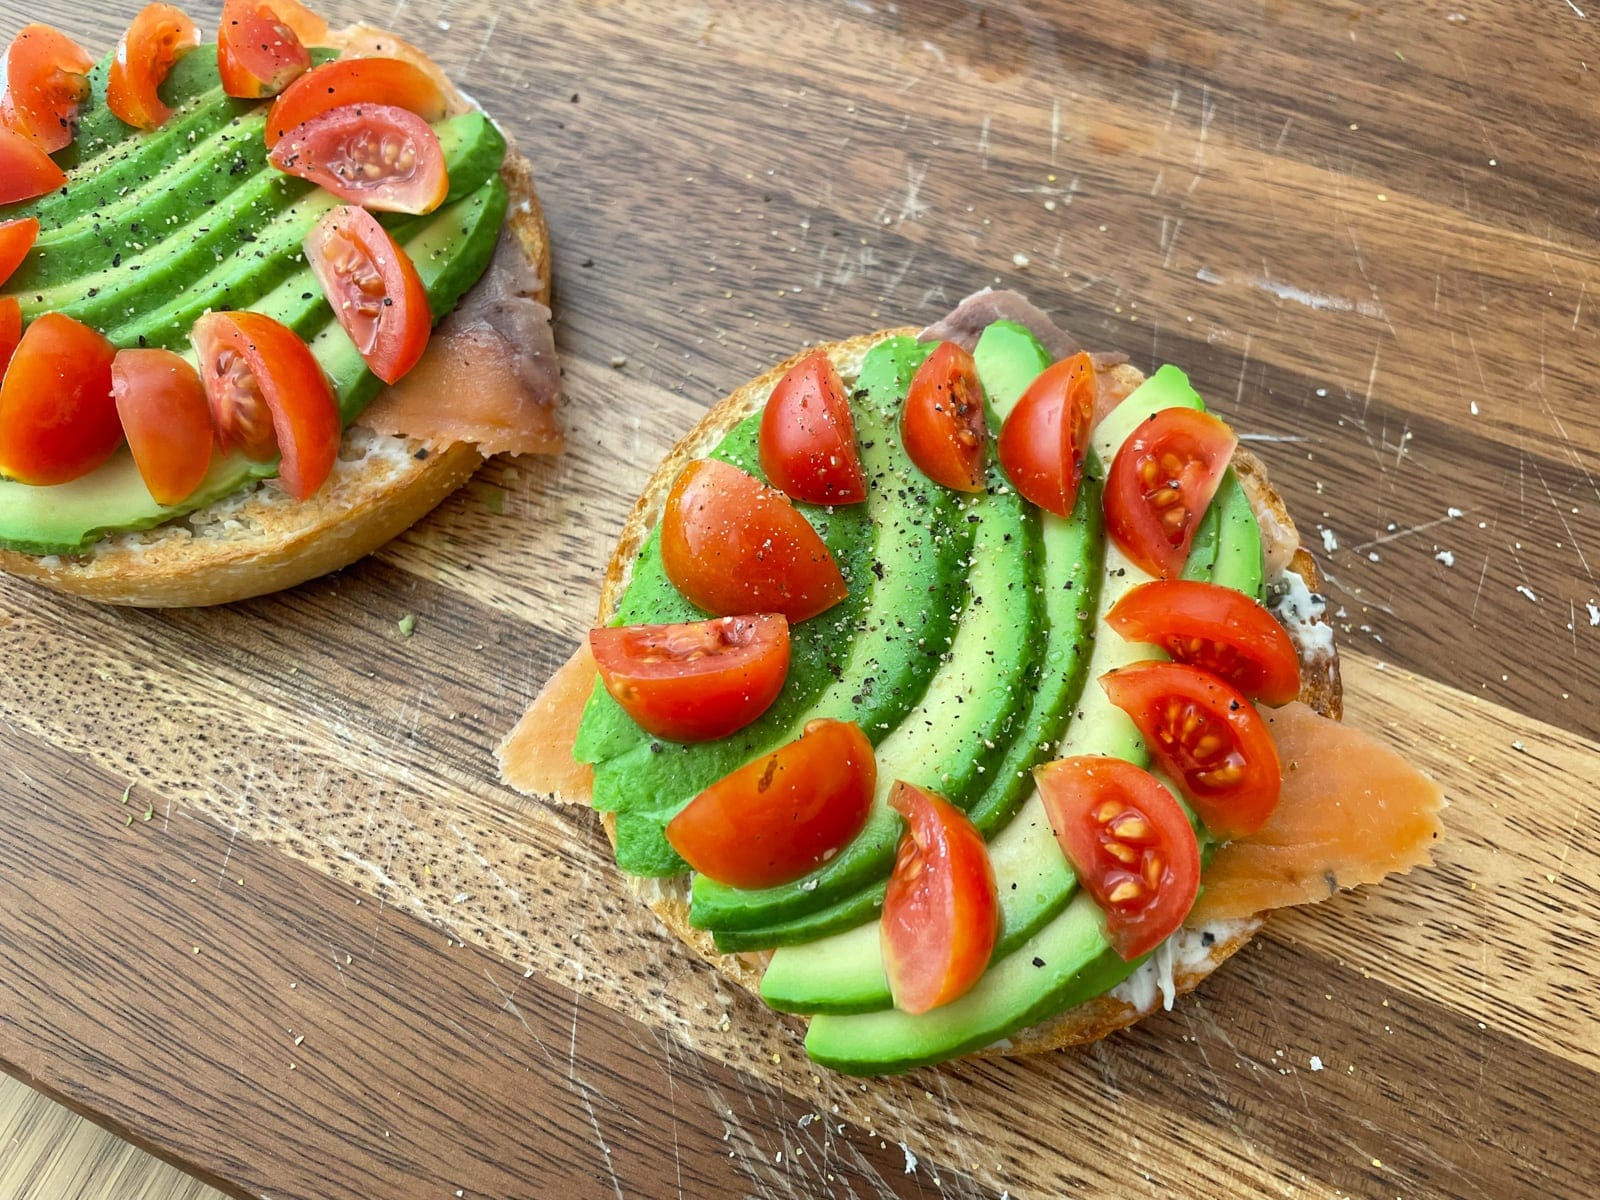 A close-up of an open bagel assembled with smoked salmon, sliced avocado and wedges of cherry tomato arranged in a circle